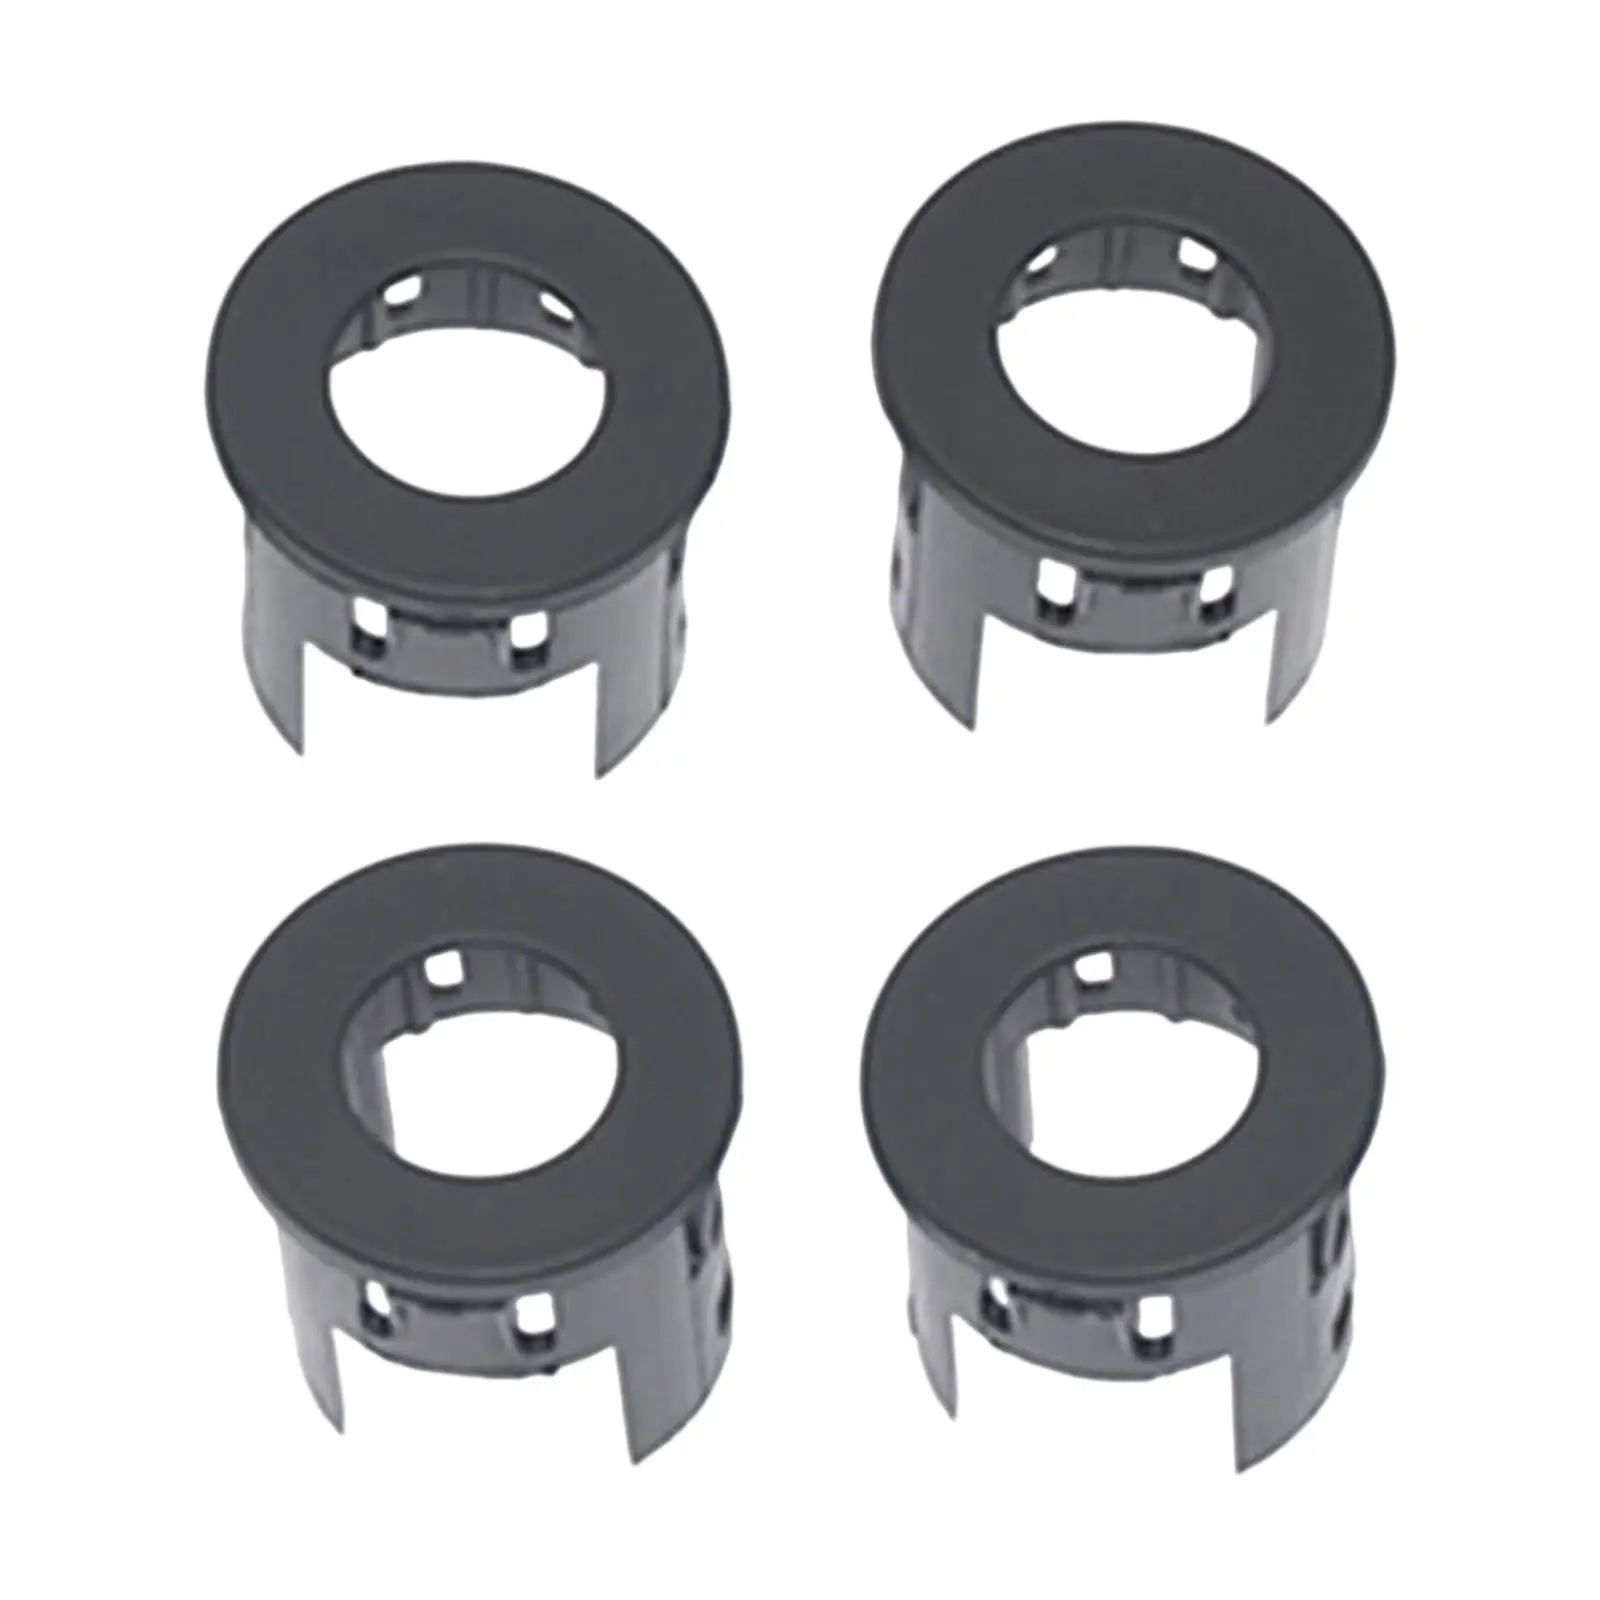 4Pcs Automotive Parking Assist Bezels, 5LS52Tzzaa Front Rear for RAM 1500 Accessory Easy Installation.